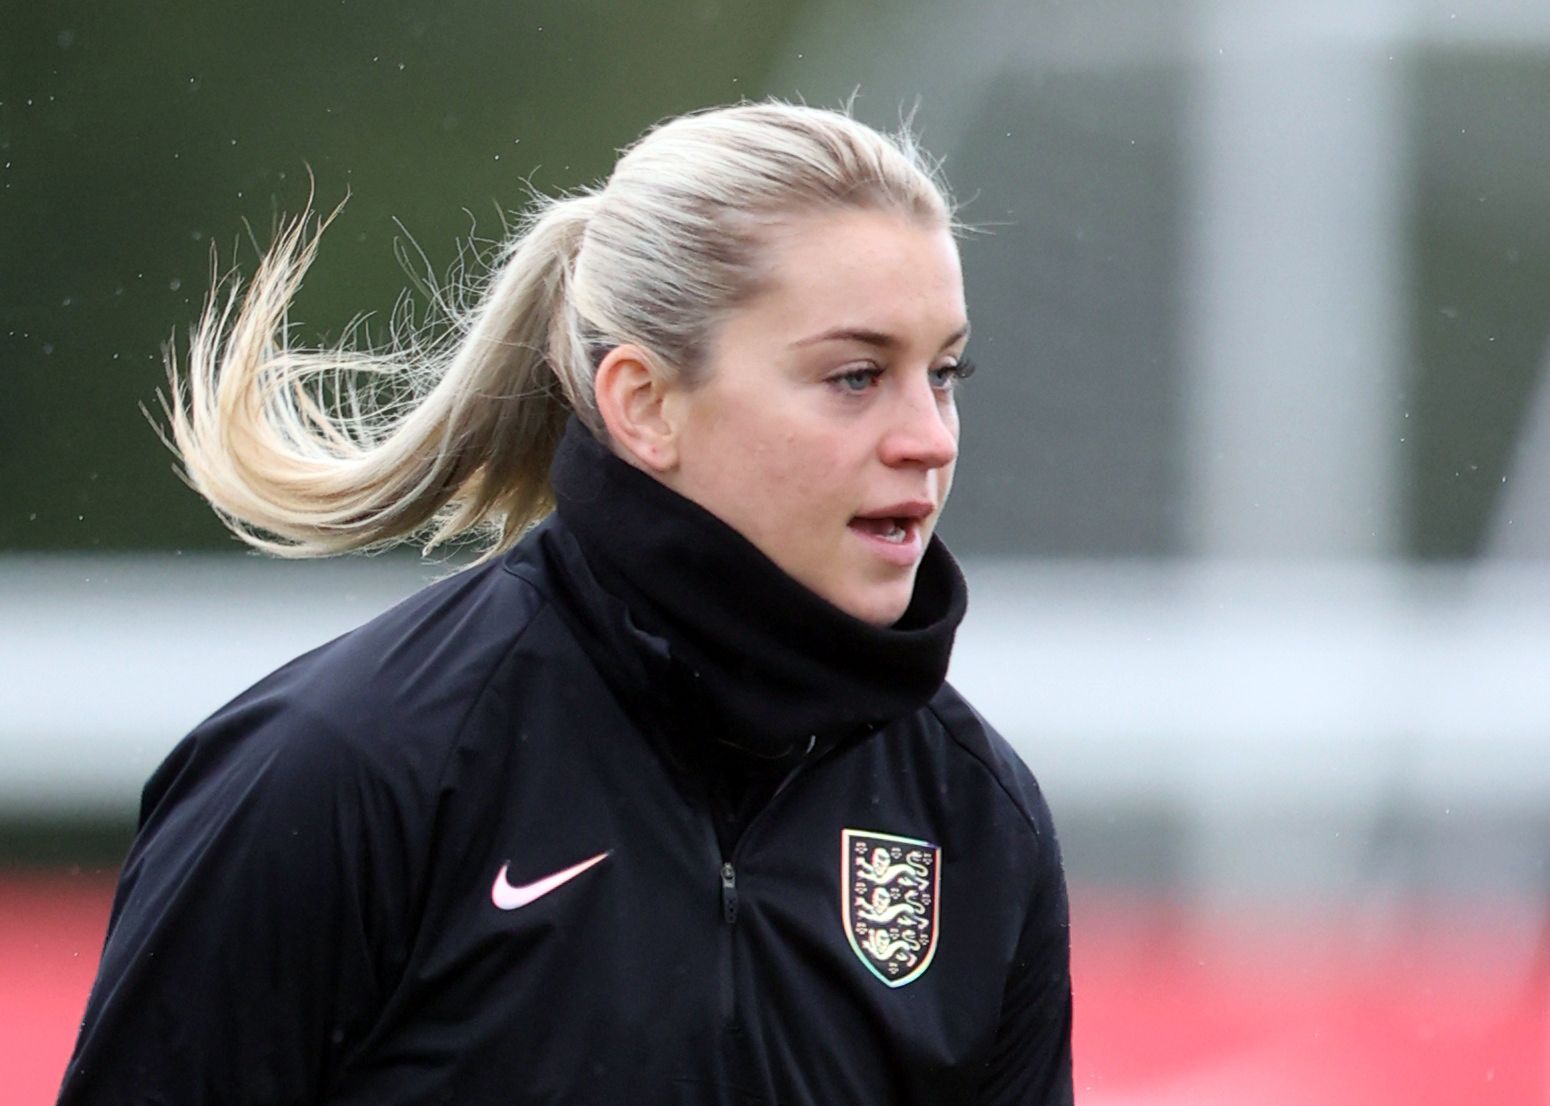 Alessia Russo plays for Manchester United and England Lionesses - but could be a 'great' addition to Bayern Munich's first team.